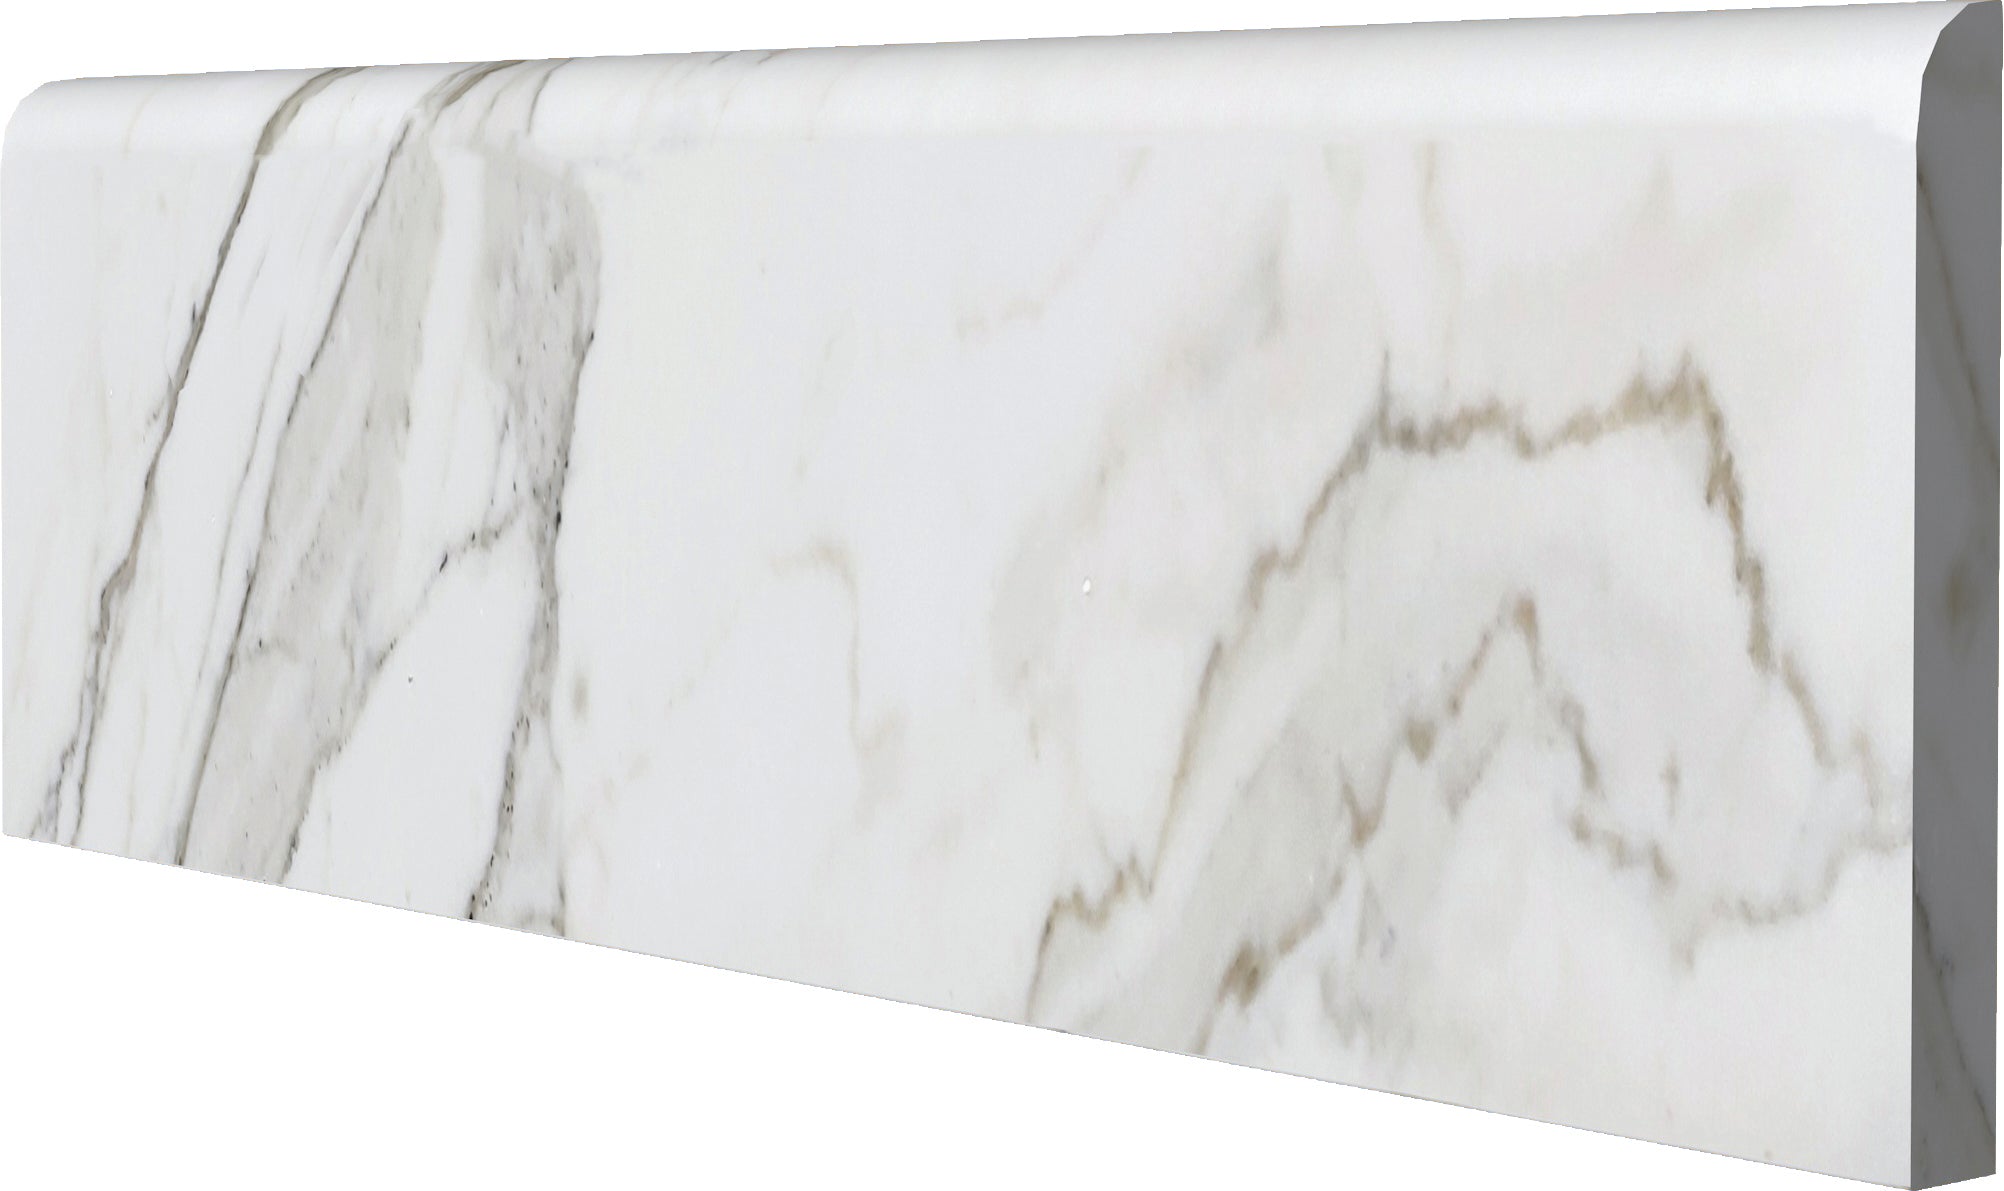 4"x12" Calacatta Gold Marble Bullnose Trim - Polished or Honed  - DW TILE & STONE - Atlanta Marble Natural Stone Wholesale Stone Supplier